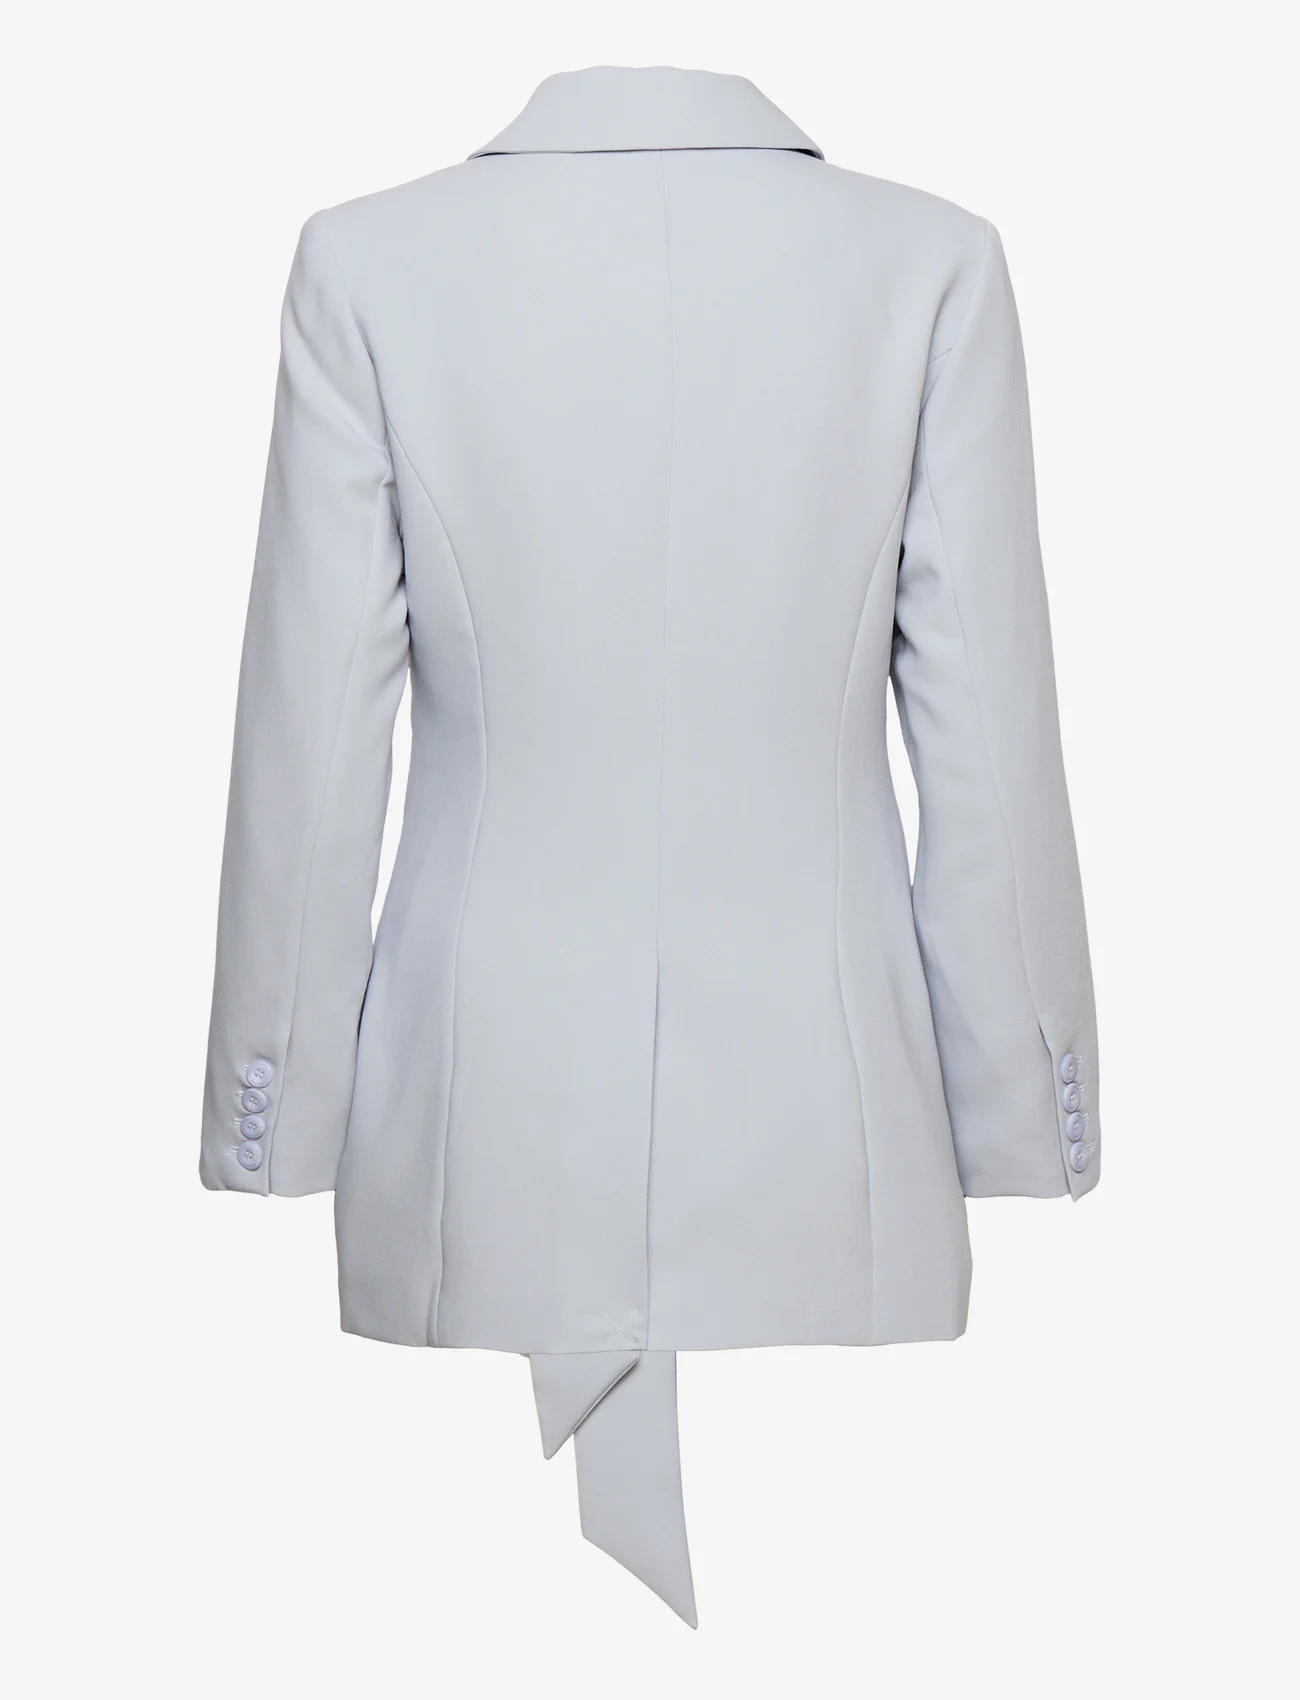 Malina - Chloe blazer - party wear at outlet prices - sky blue - 1